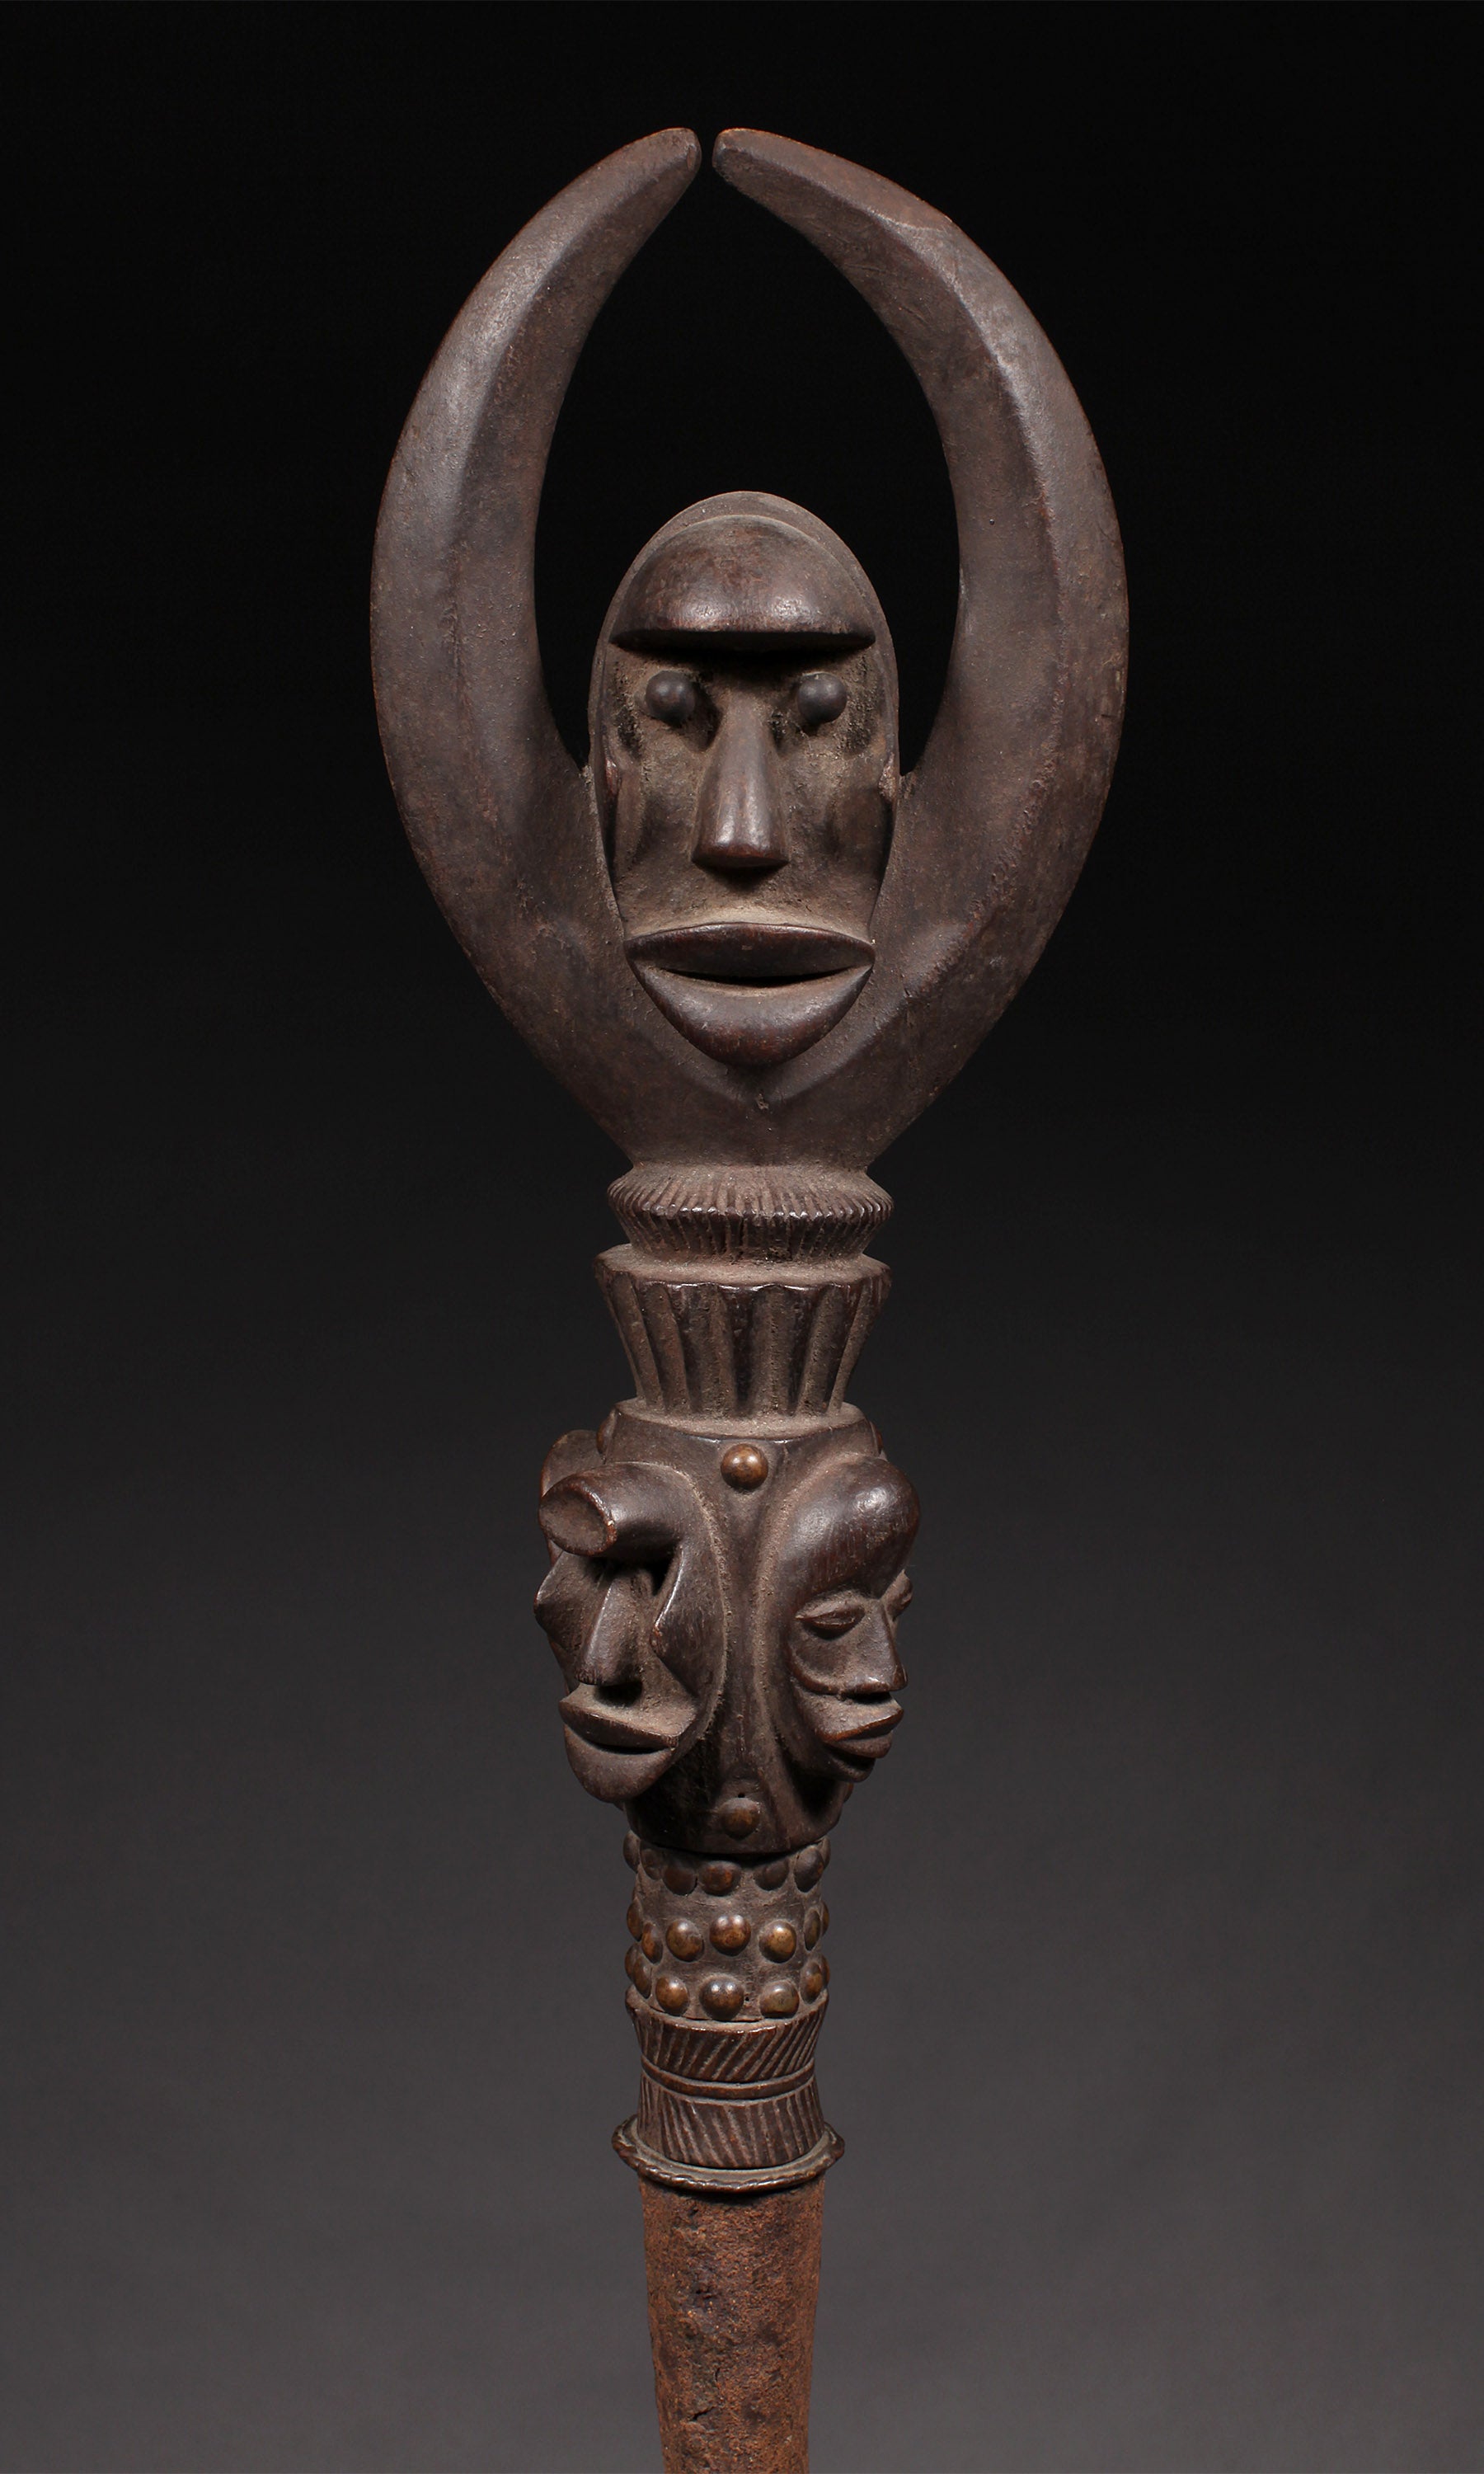 Tribal Objects - African Tribal Art - Ancient Ceremonial Art - Handcrafted Artifacts - Masks - Wood Sculptures - Iron Bronze Objects - Textiles - Art Pieces - African Folk Art - This exquisite Prestige Object from the Dan Tribe of the Ivory Coast is crafted from expertly carved wood and iron. An heirloom-quality artifact, it is a stunning representation of the tribe's art and an elegant addition to any collection of African tribal art. H: 57